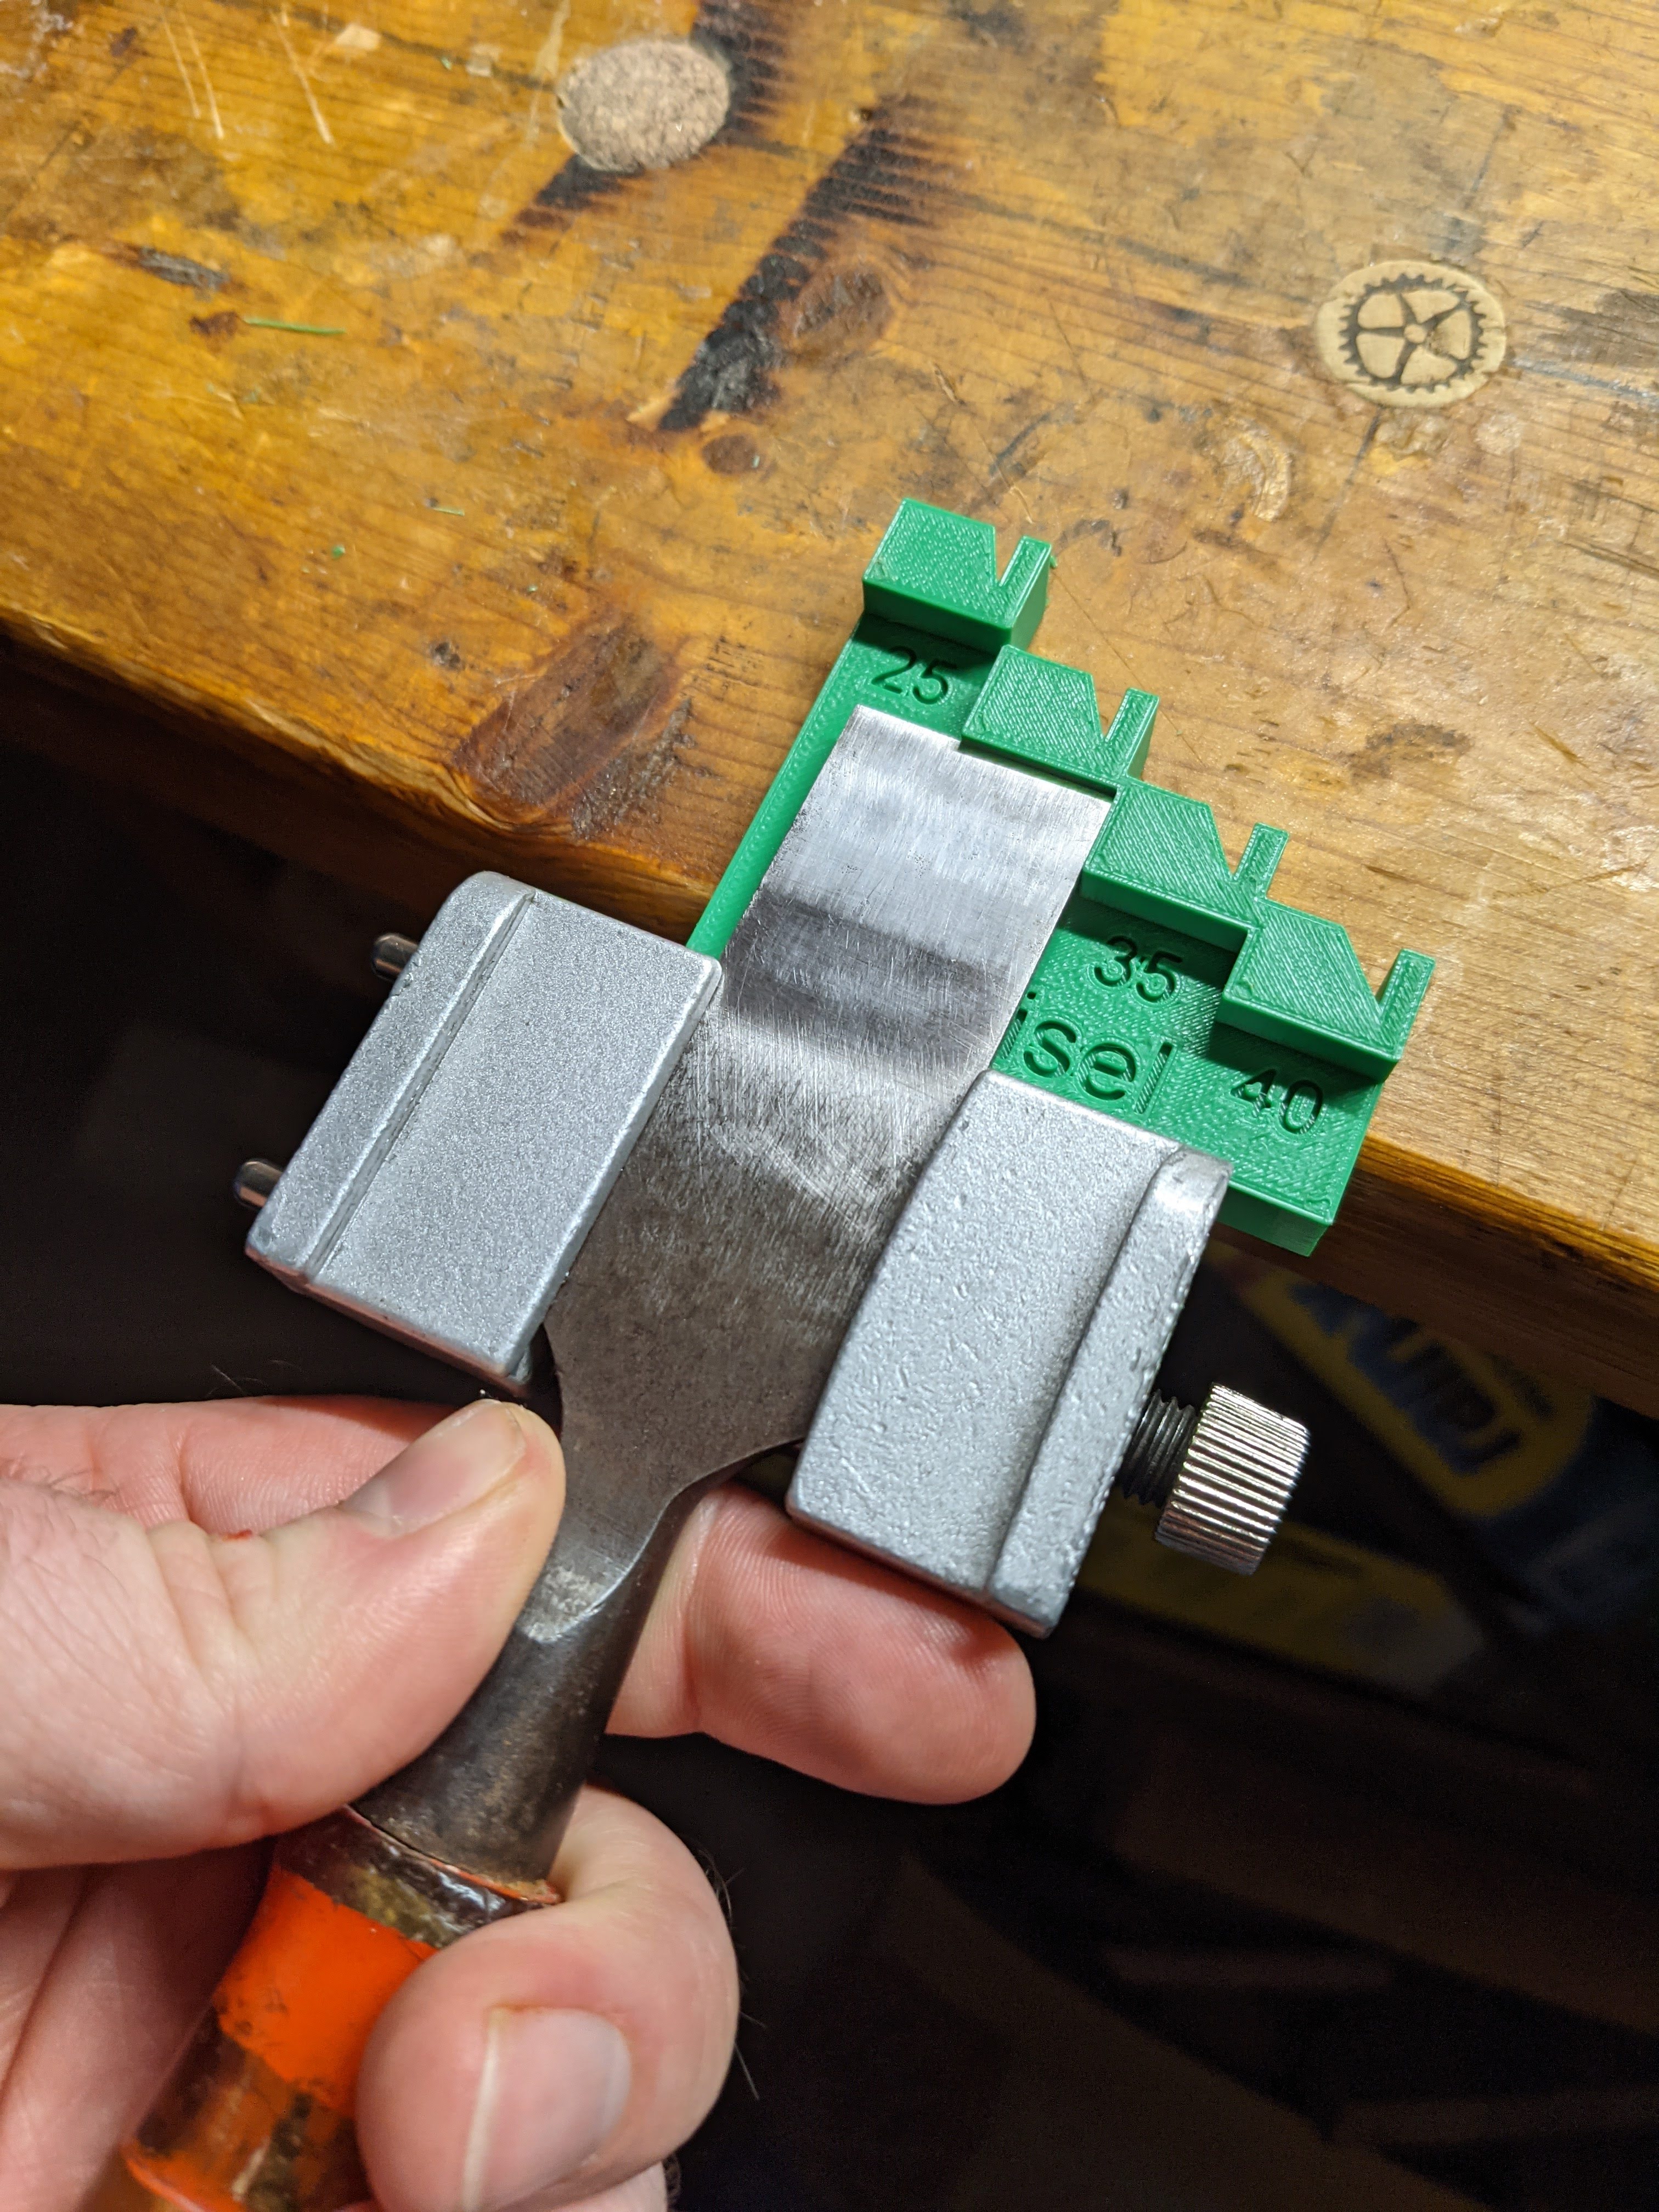 Eclipse Style Chisel and Plane Iron Sharpening and Honing Guide